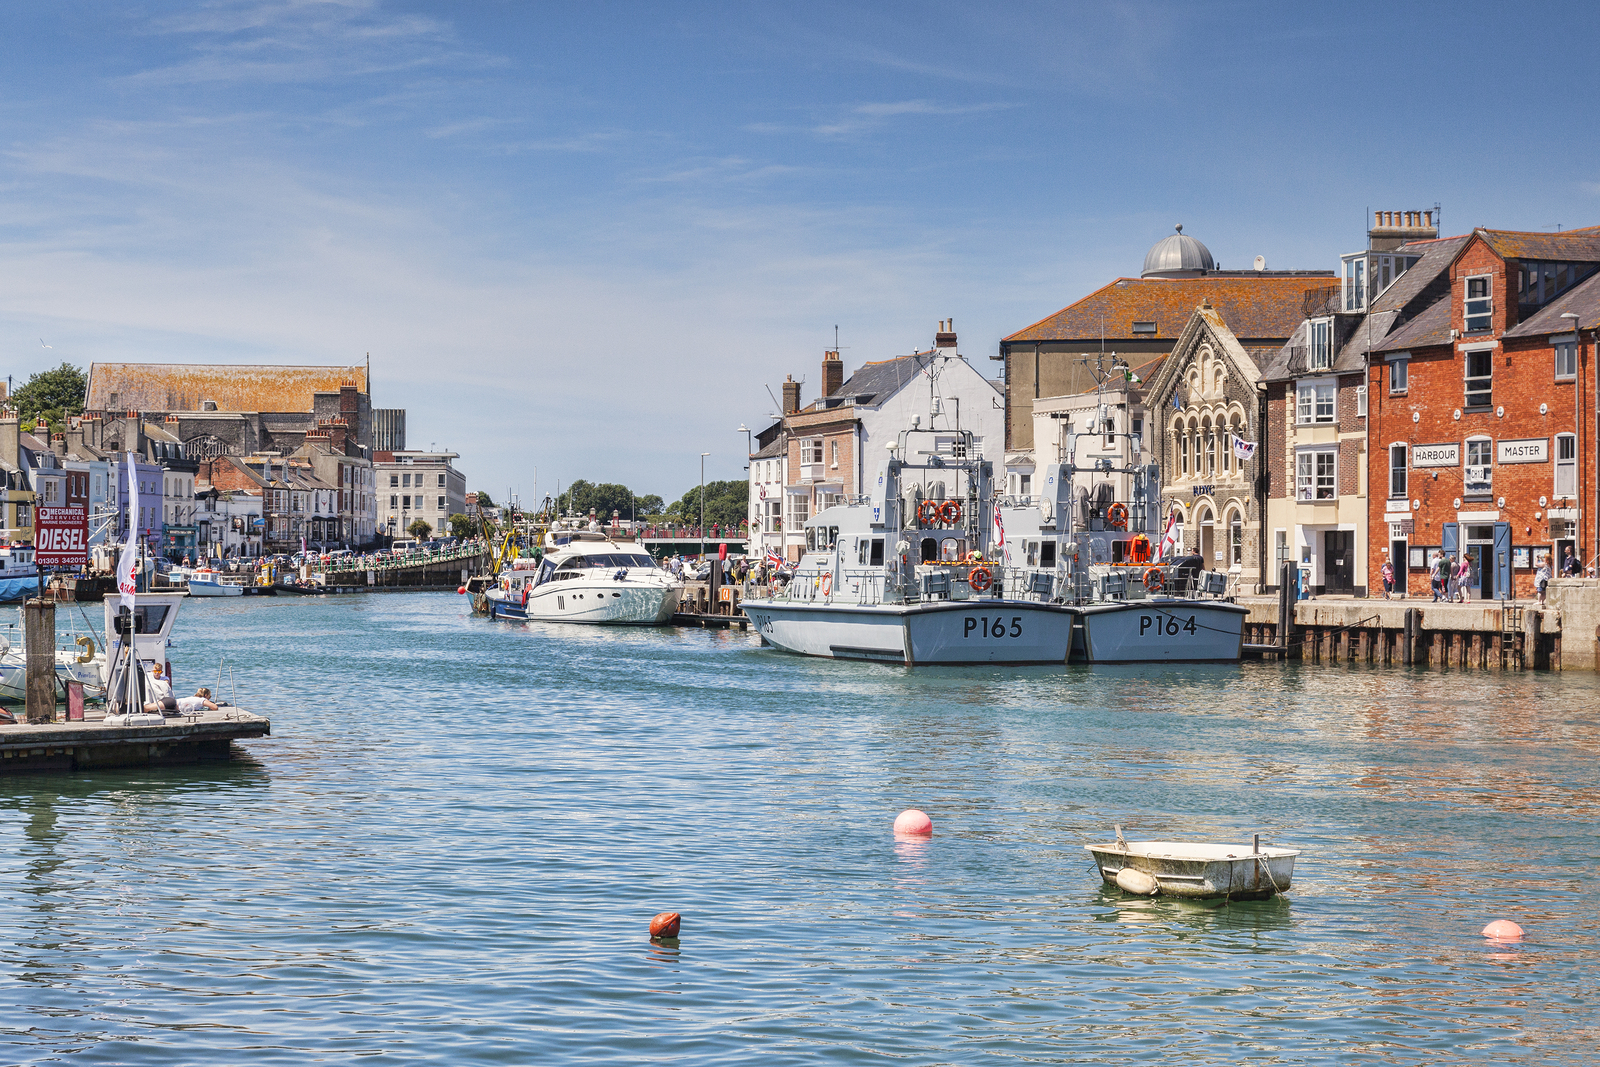 What Are The Top 10 Most Popular UK Holiday Destinations?